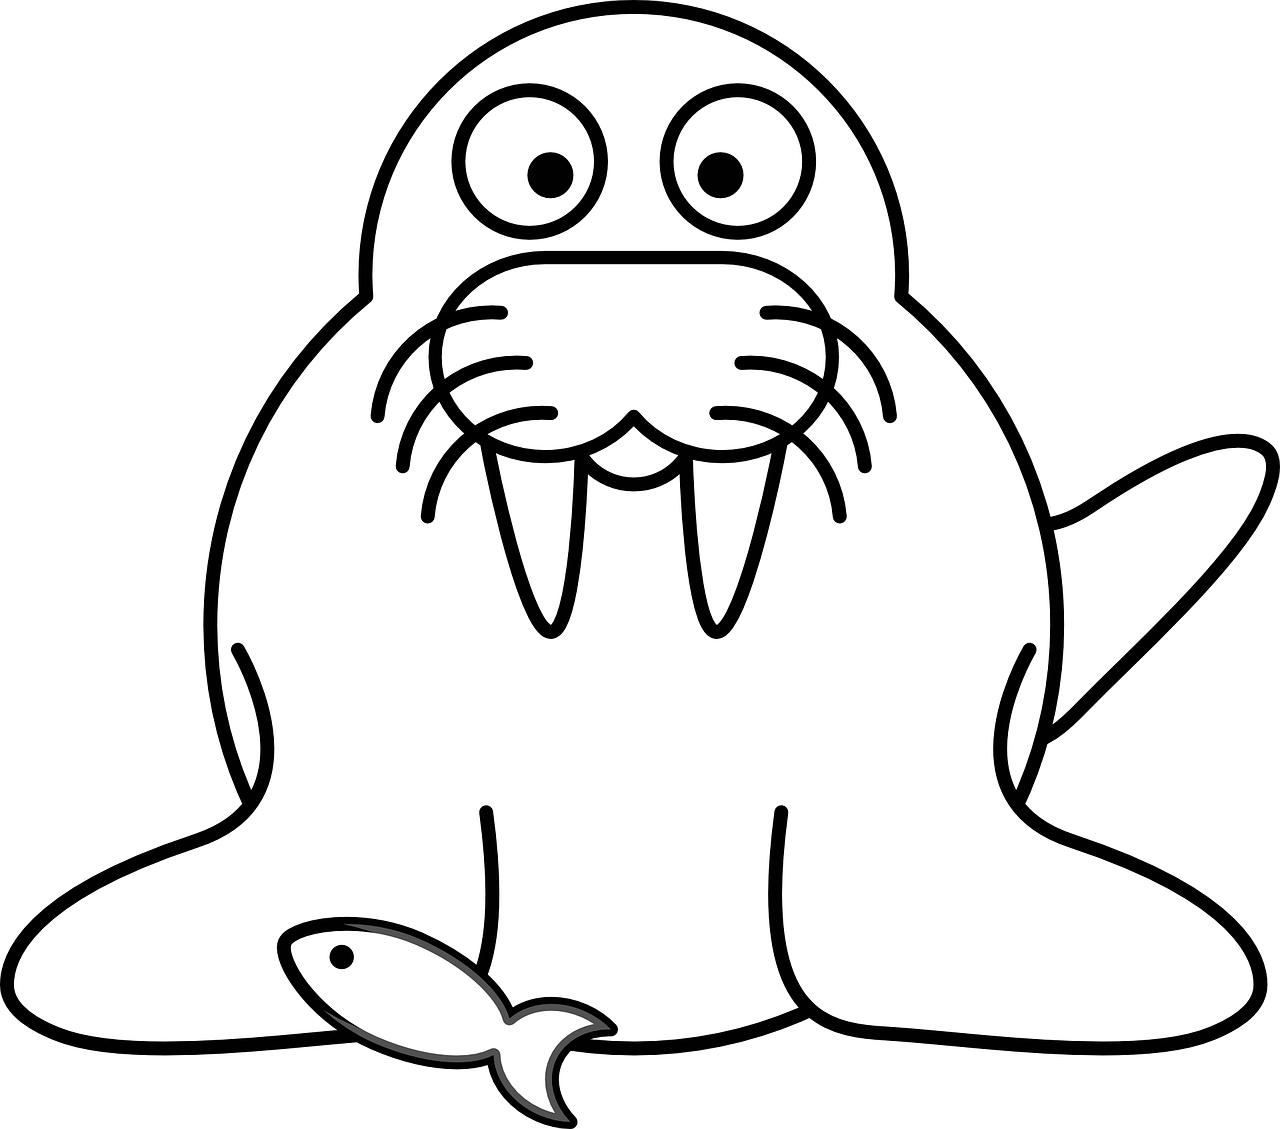 Cartoon Walrus With Fish_ Vector Illustration PNG